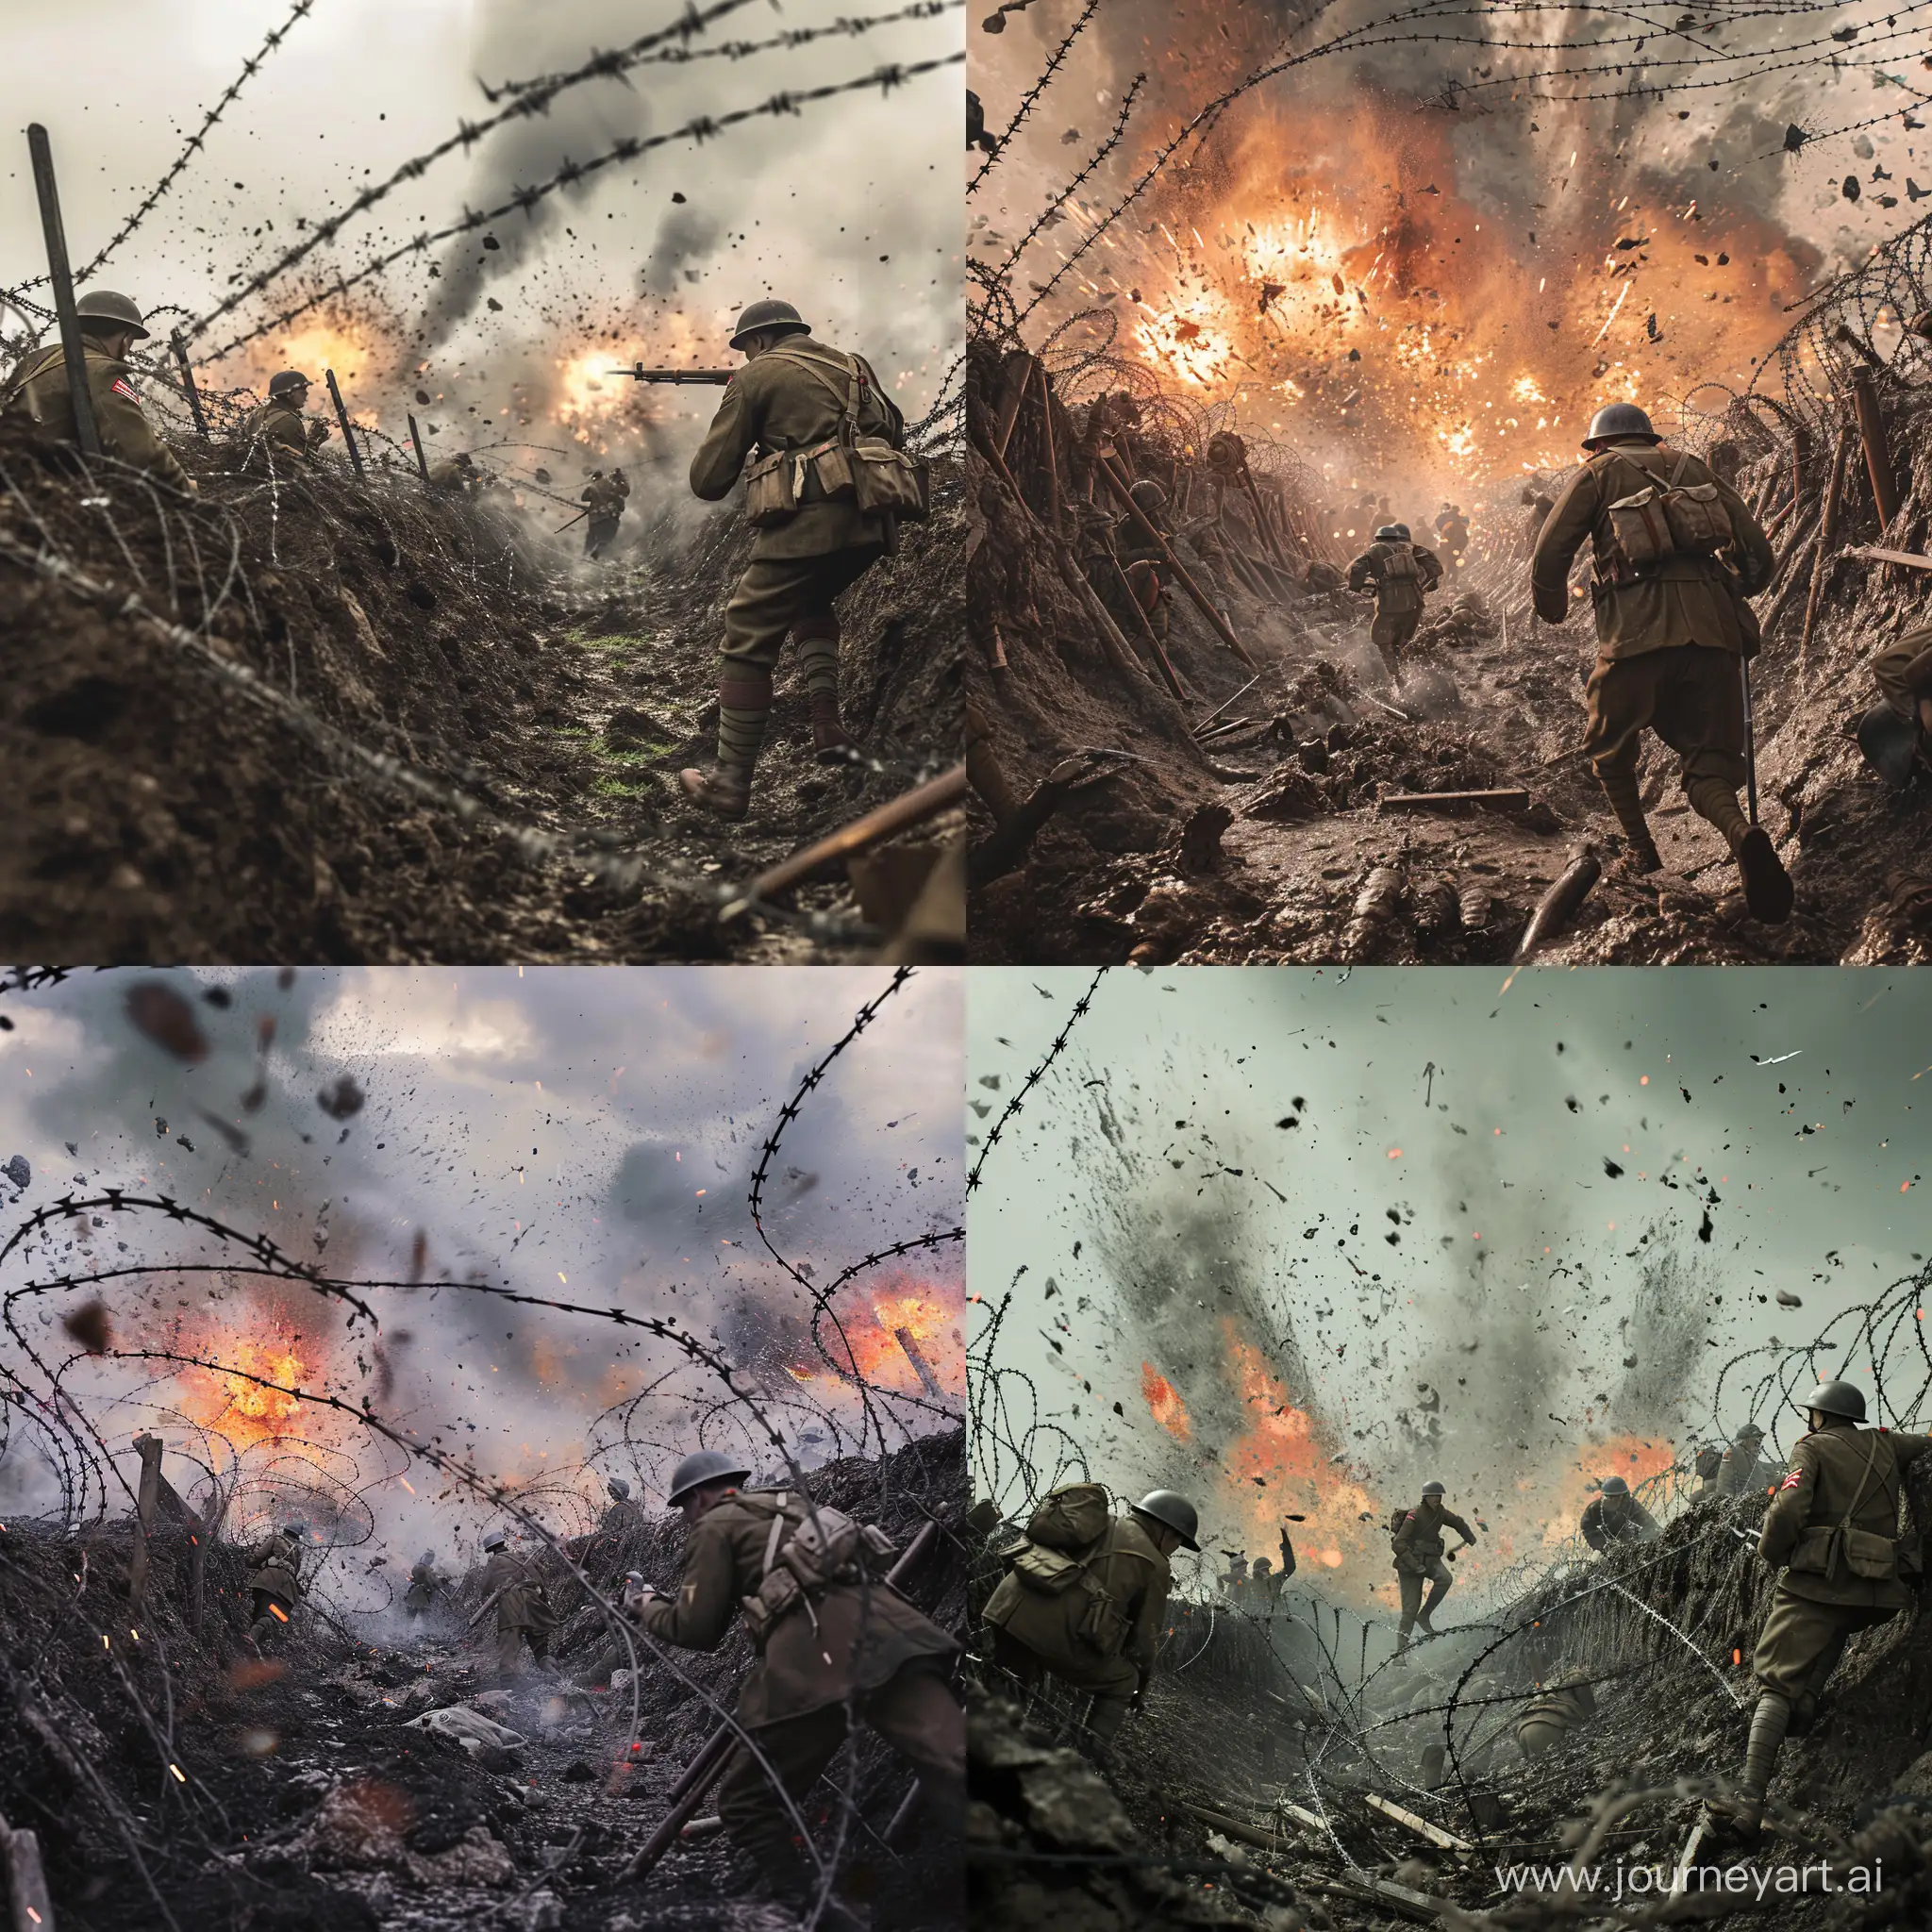 Intense-World-War-I-Battle-Scene-with-Trenches-and-Soldiers